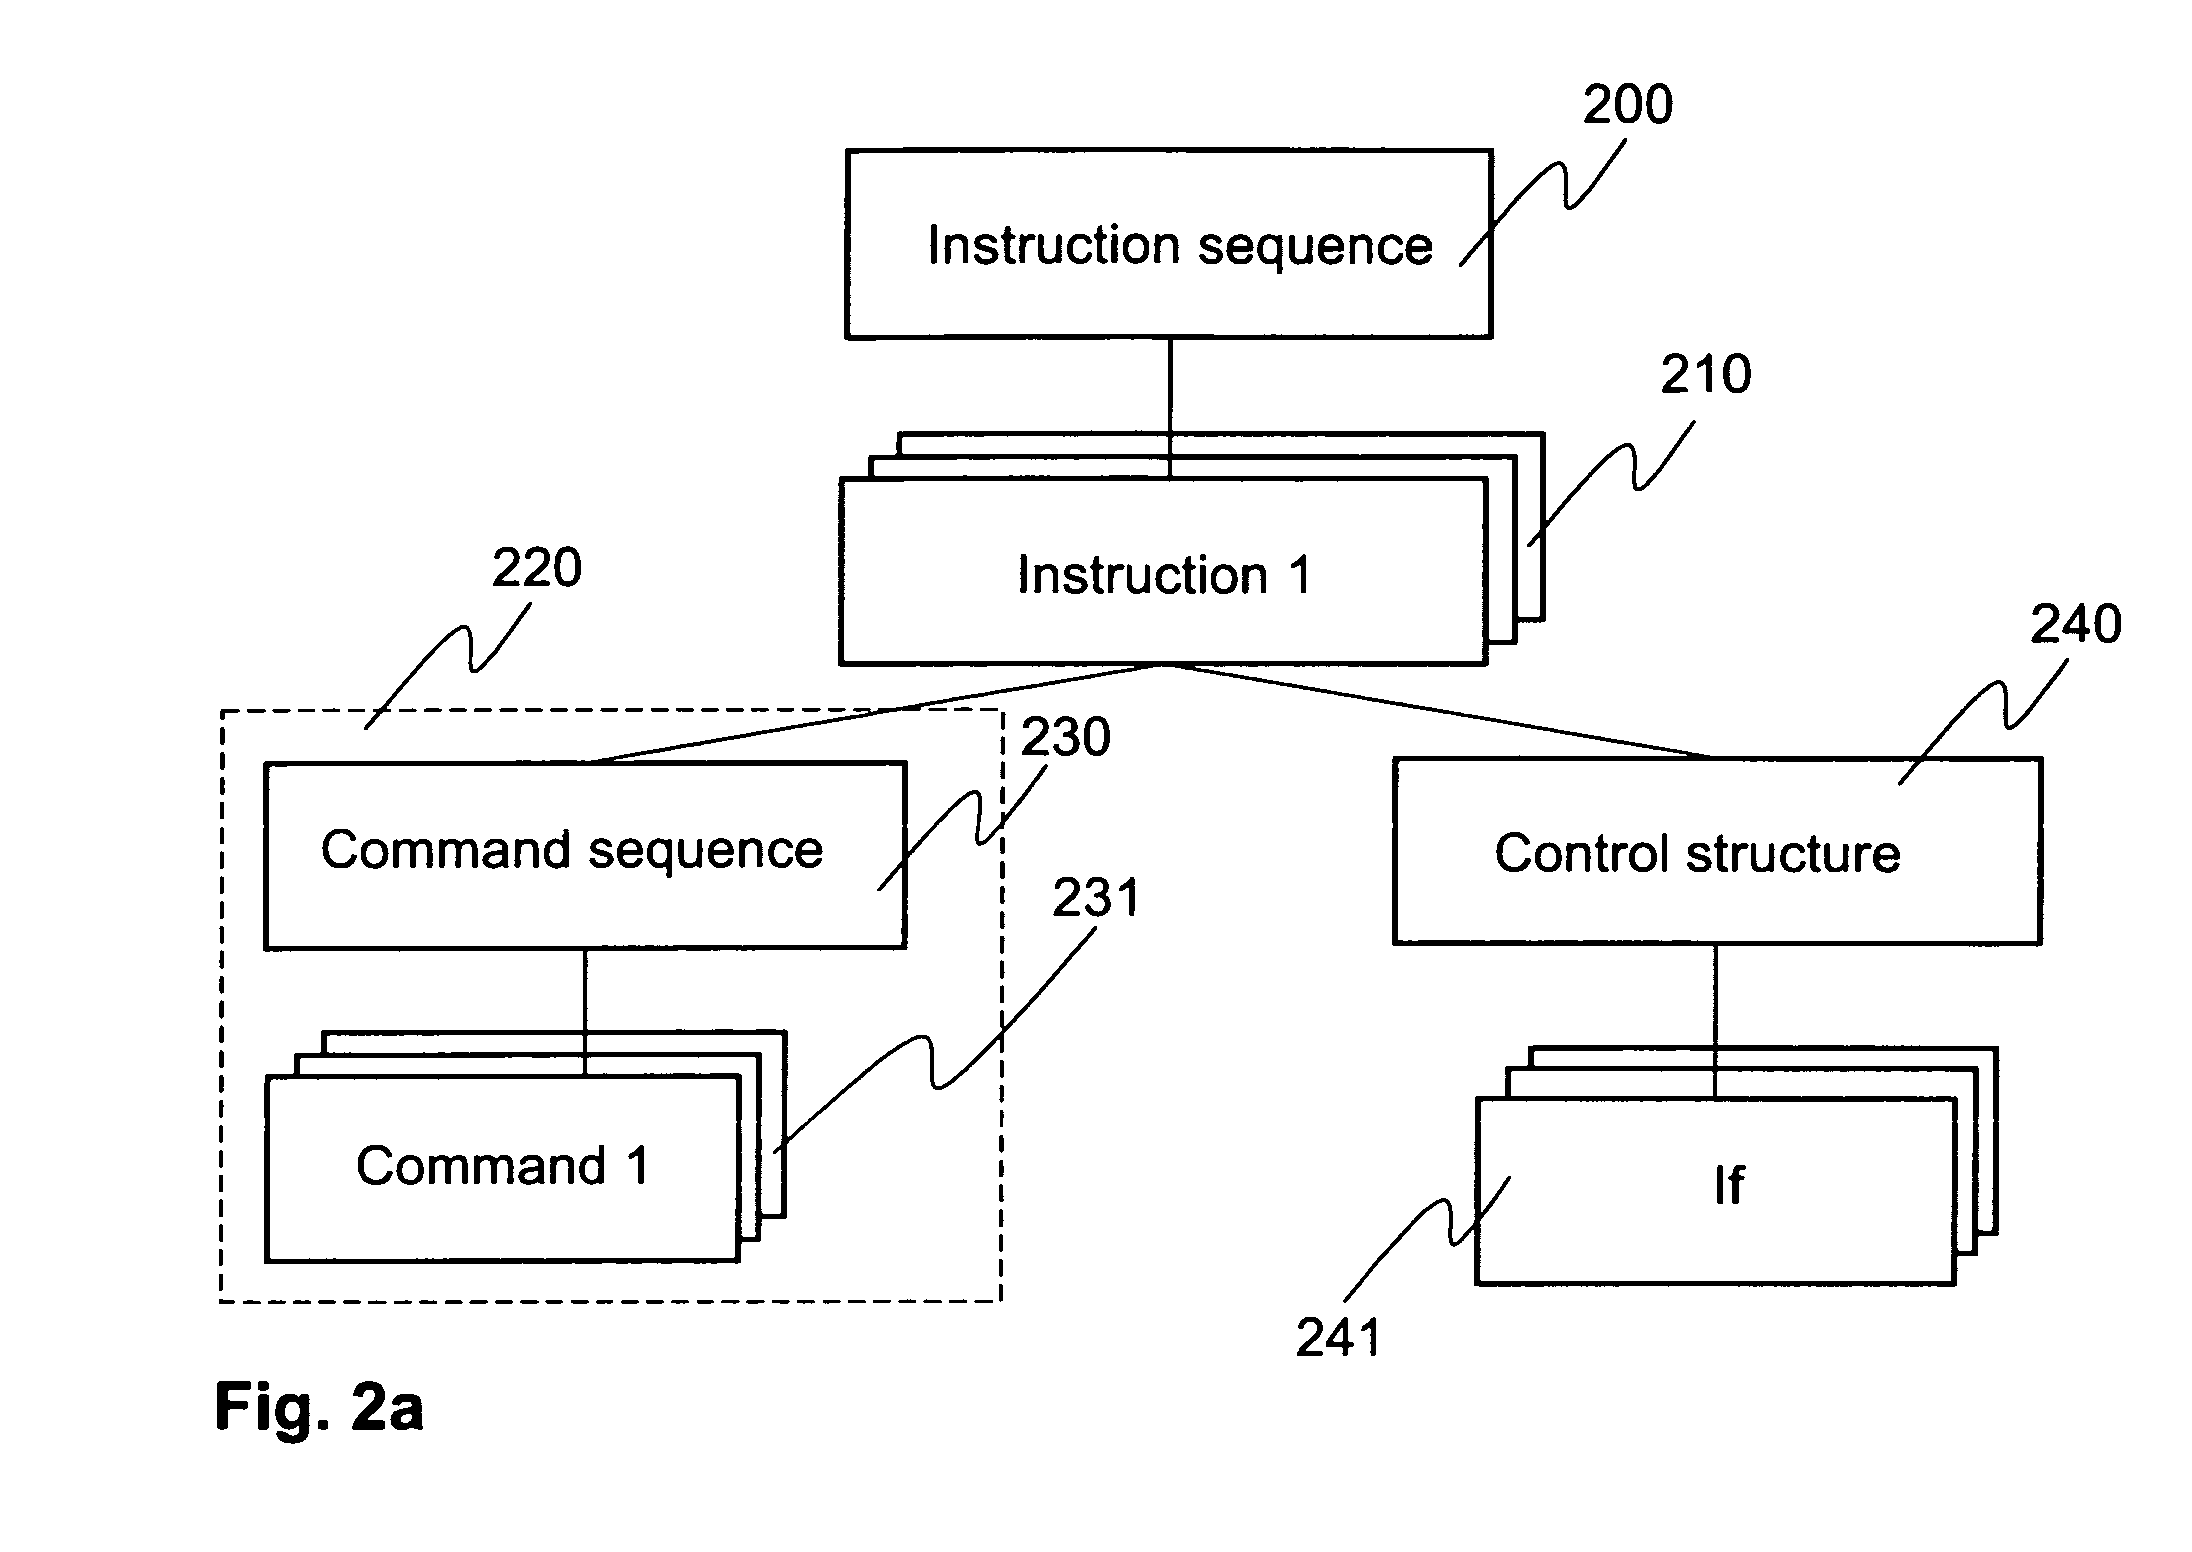 Method and device arrangement for managing a client/server environment